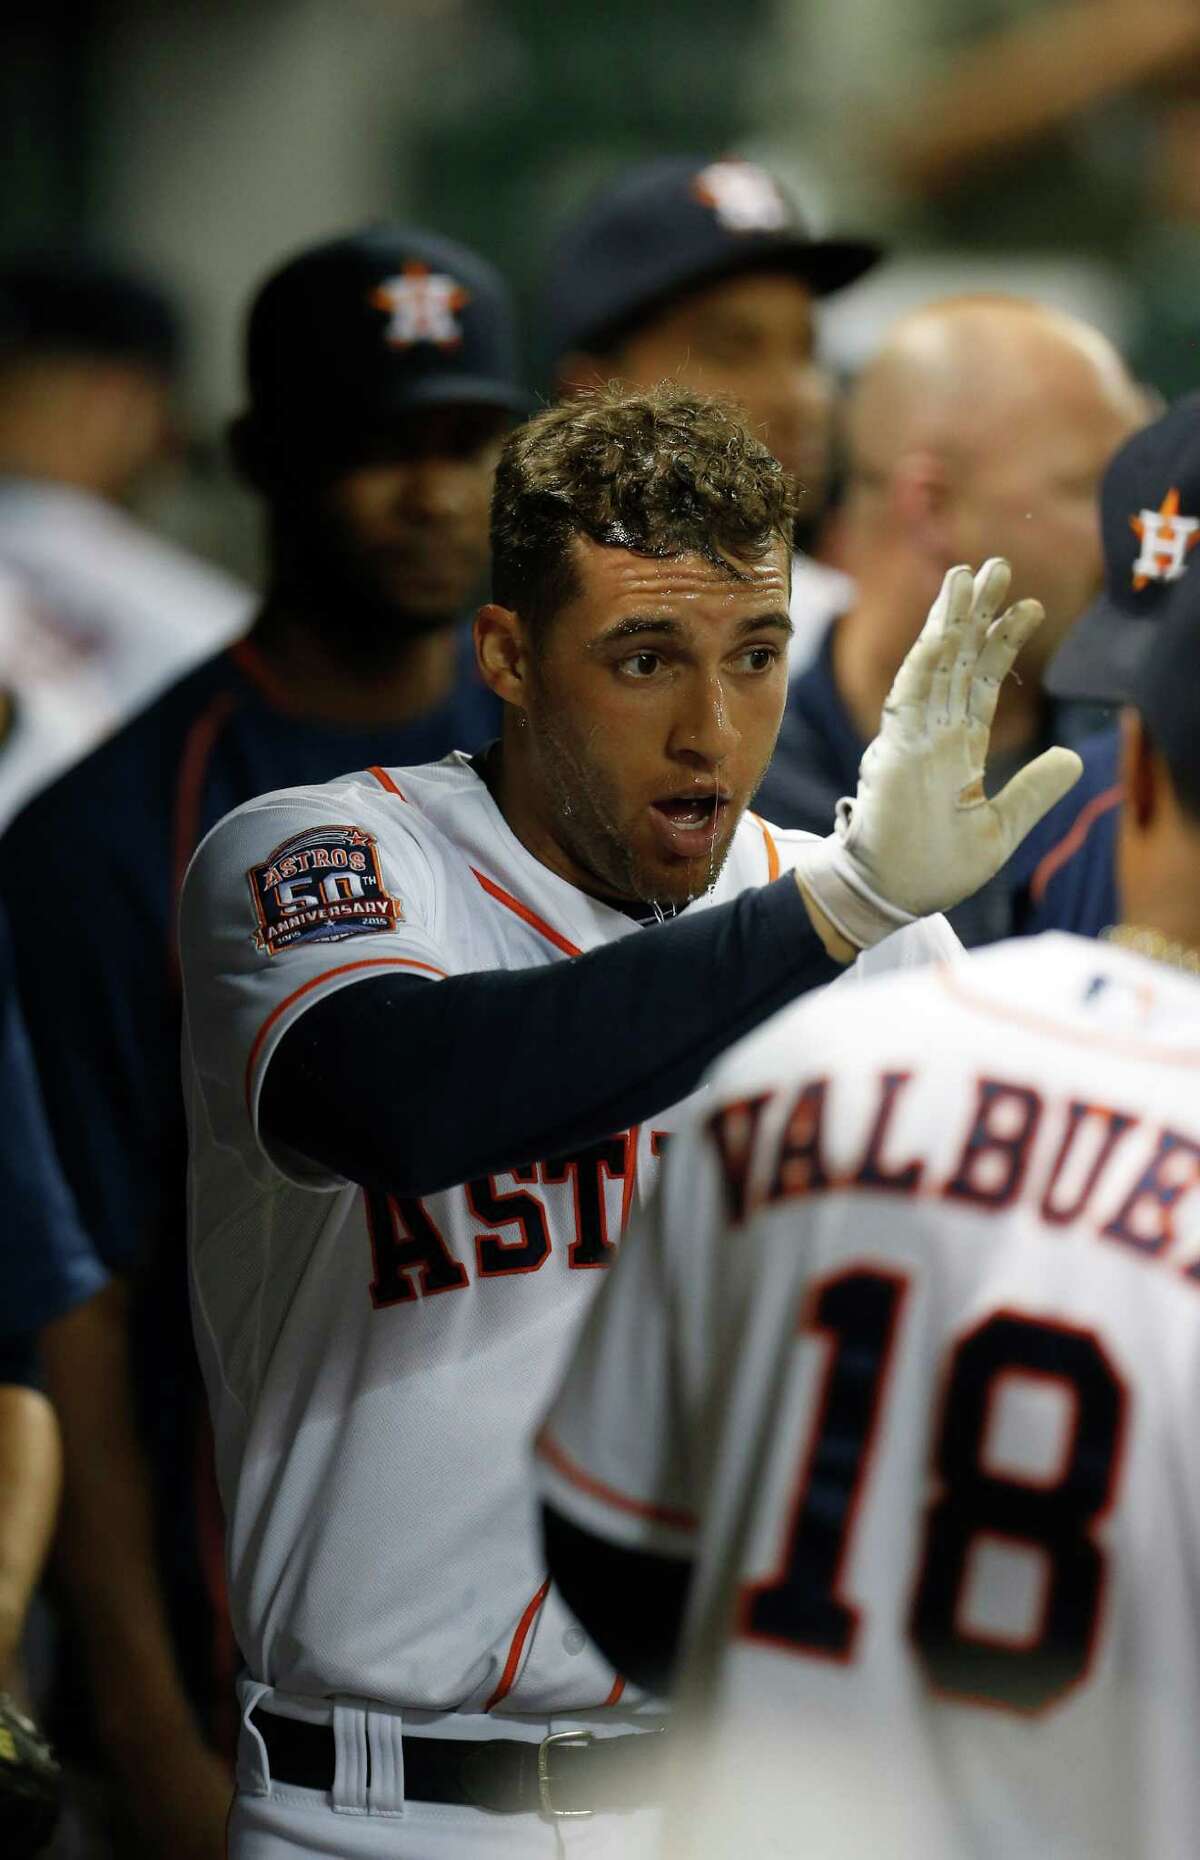 George Springer worked in the offseason to try to avoid another long layoff due to injury.